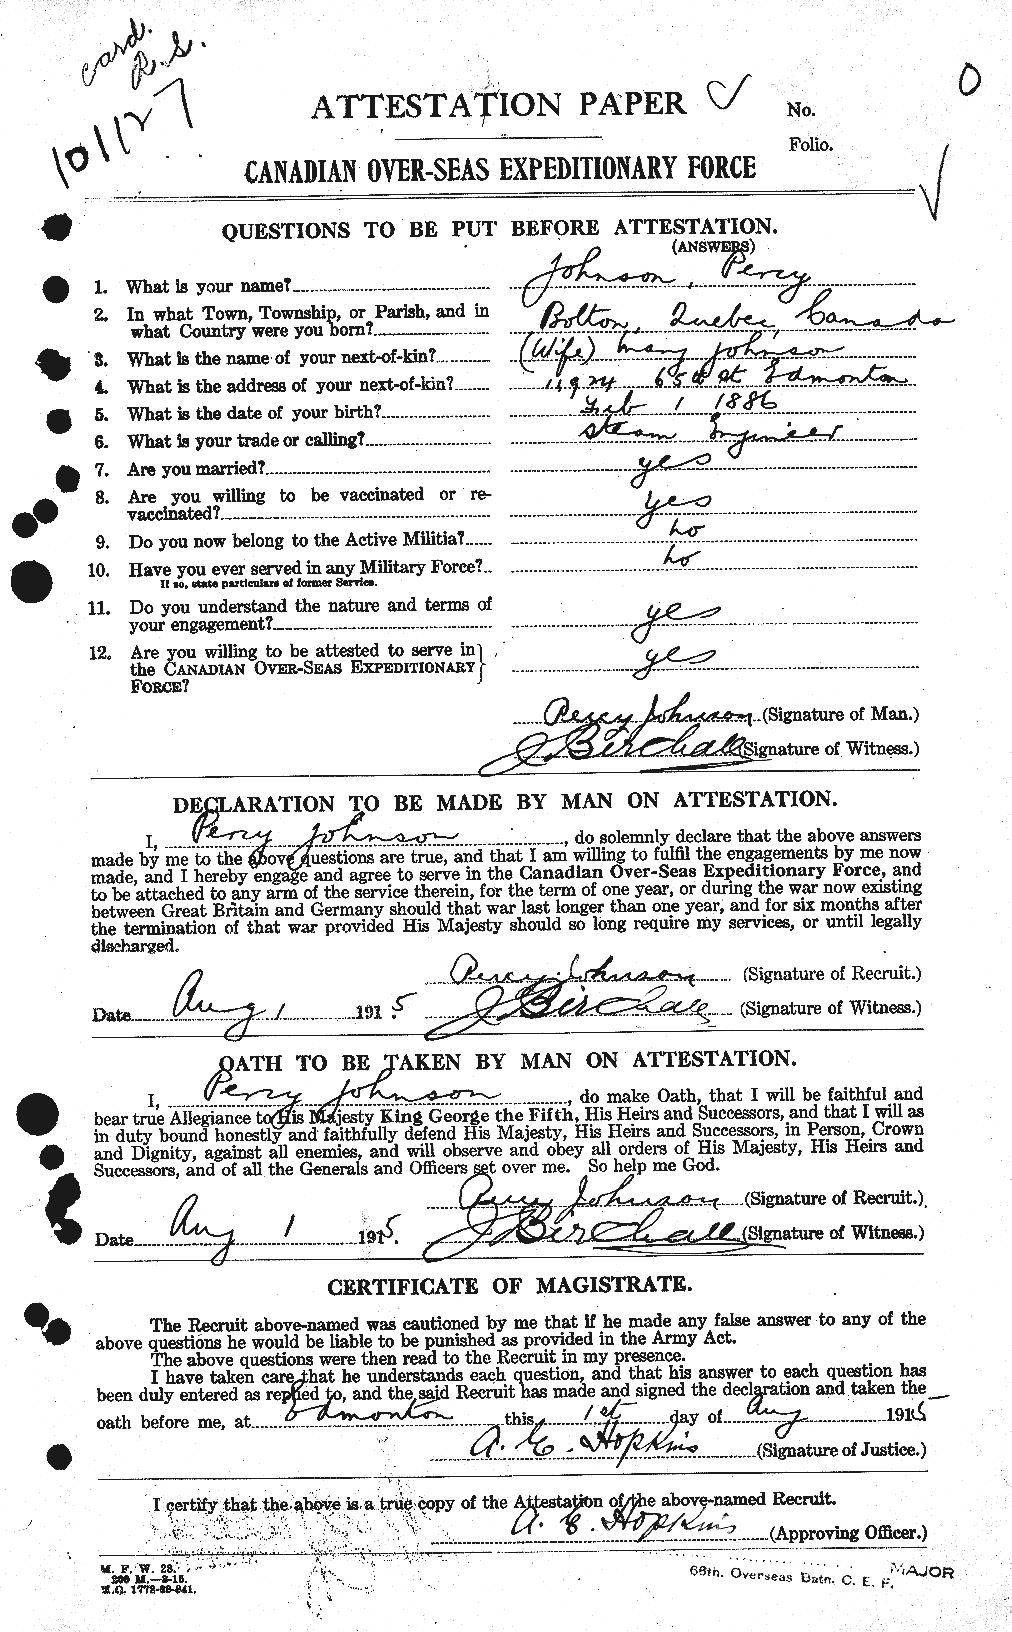 Personnel Records of the First World War - CEF 417259a